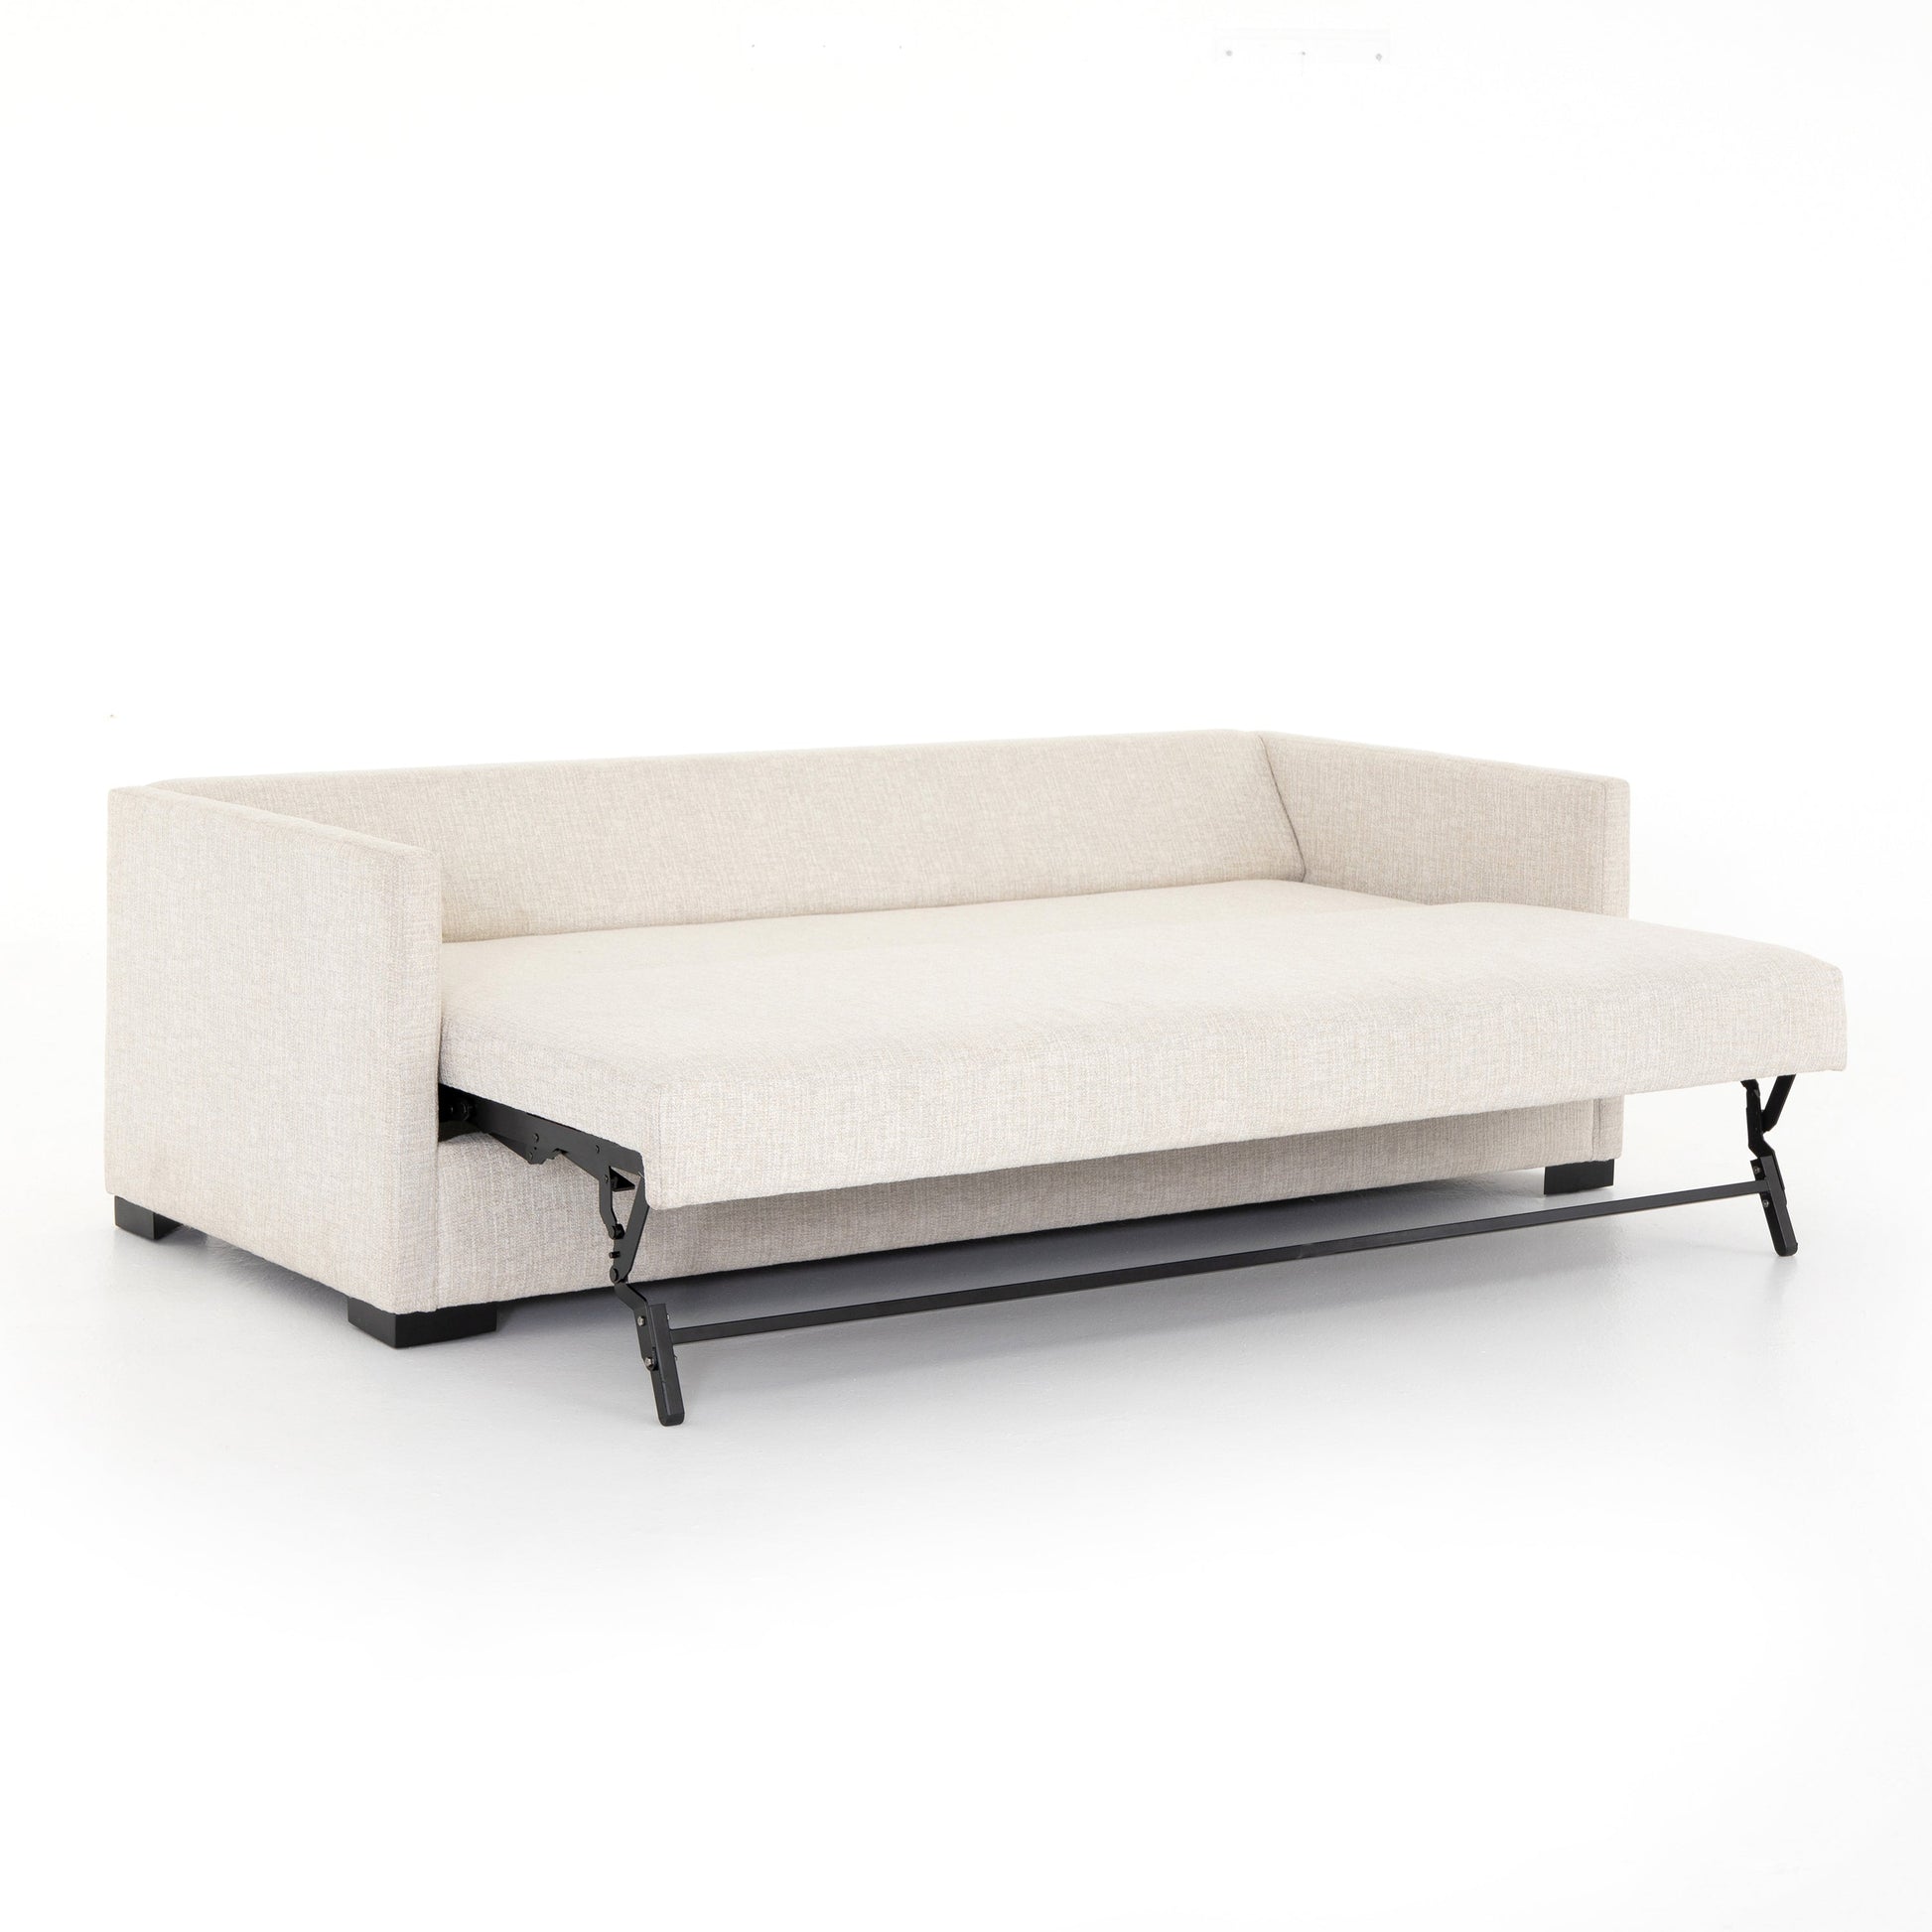 A contemporary sofa bed featuring knife-edge cushions and high-end fabric for ultimate comfort and style. The queen-size bed hidden within makes it effortless to accommodate overnight guests or enjoy cozy movie nights. Durable performance fabric ensures resistance to spills, stains, and high traffic, making it a long-lasting choice for busy households. 